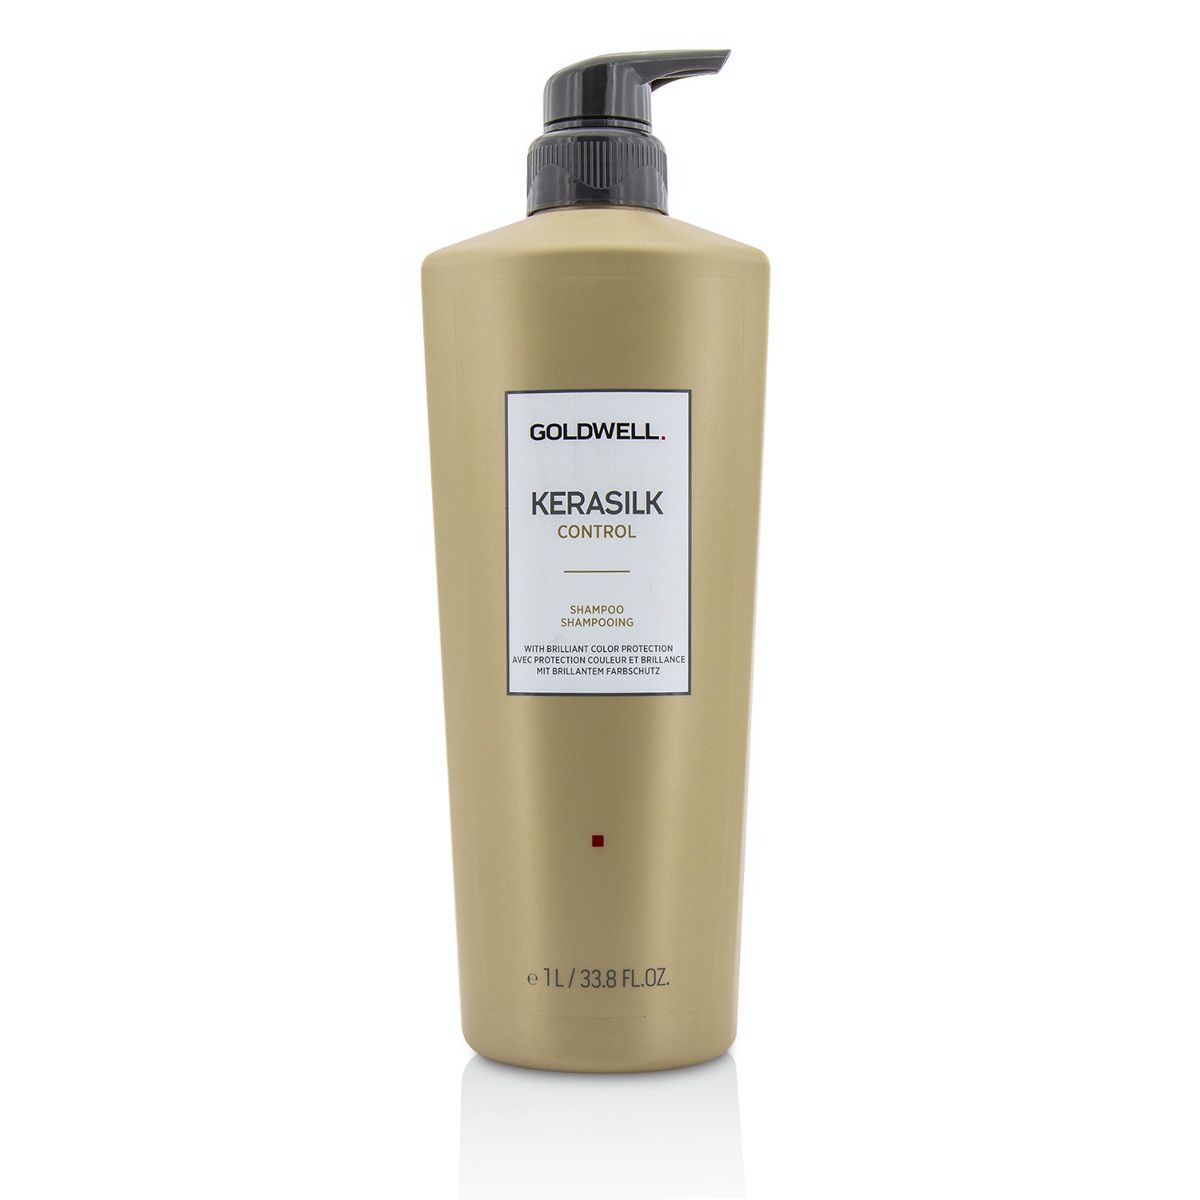 Kerasilk Control Shampoo (For Unmanageable Unruly and Frizzy Hair) Goldwell Image